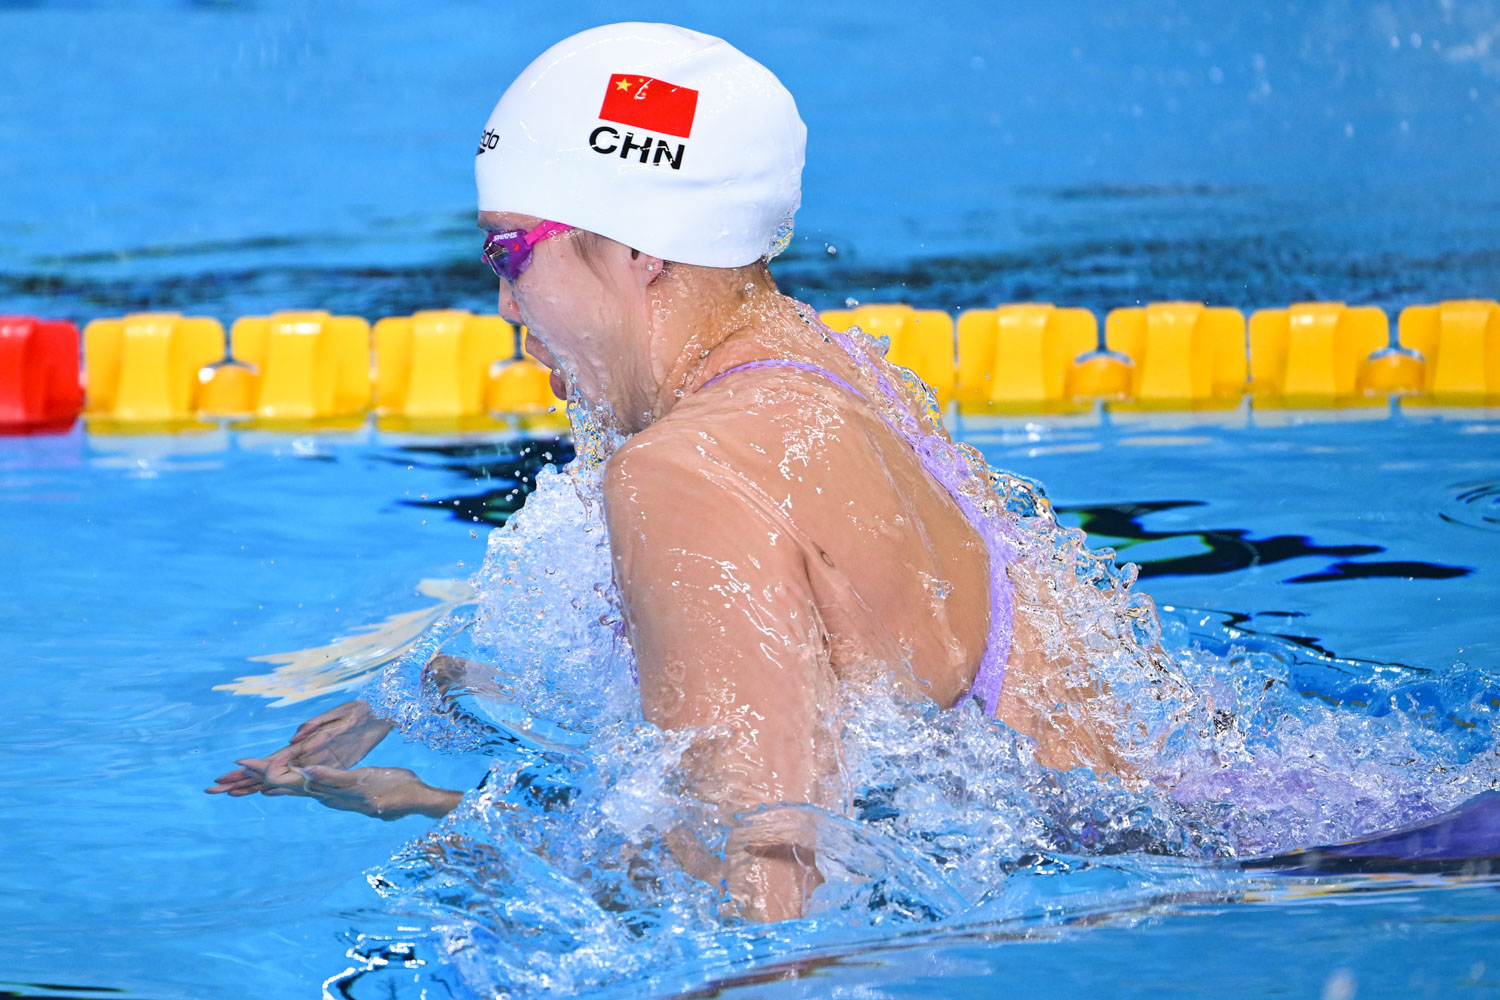 Tang Qianting Breaks Asian Record in 100 Breaststroke with Time of 1:04.39